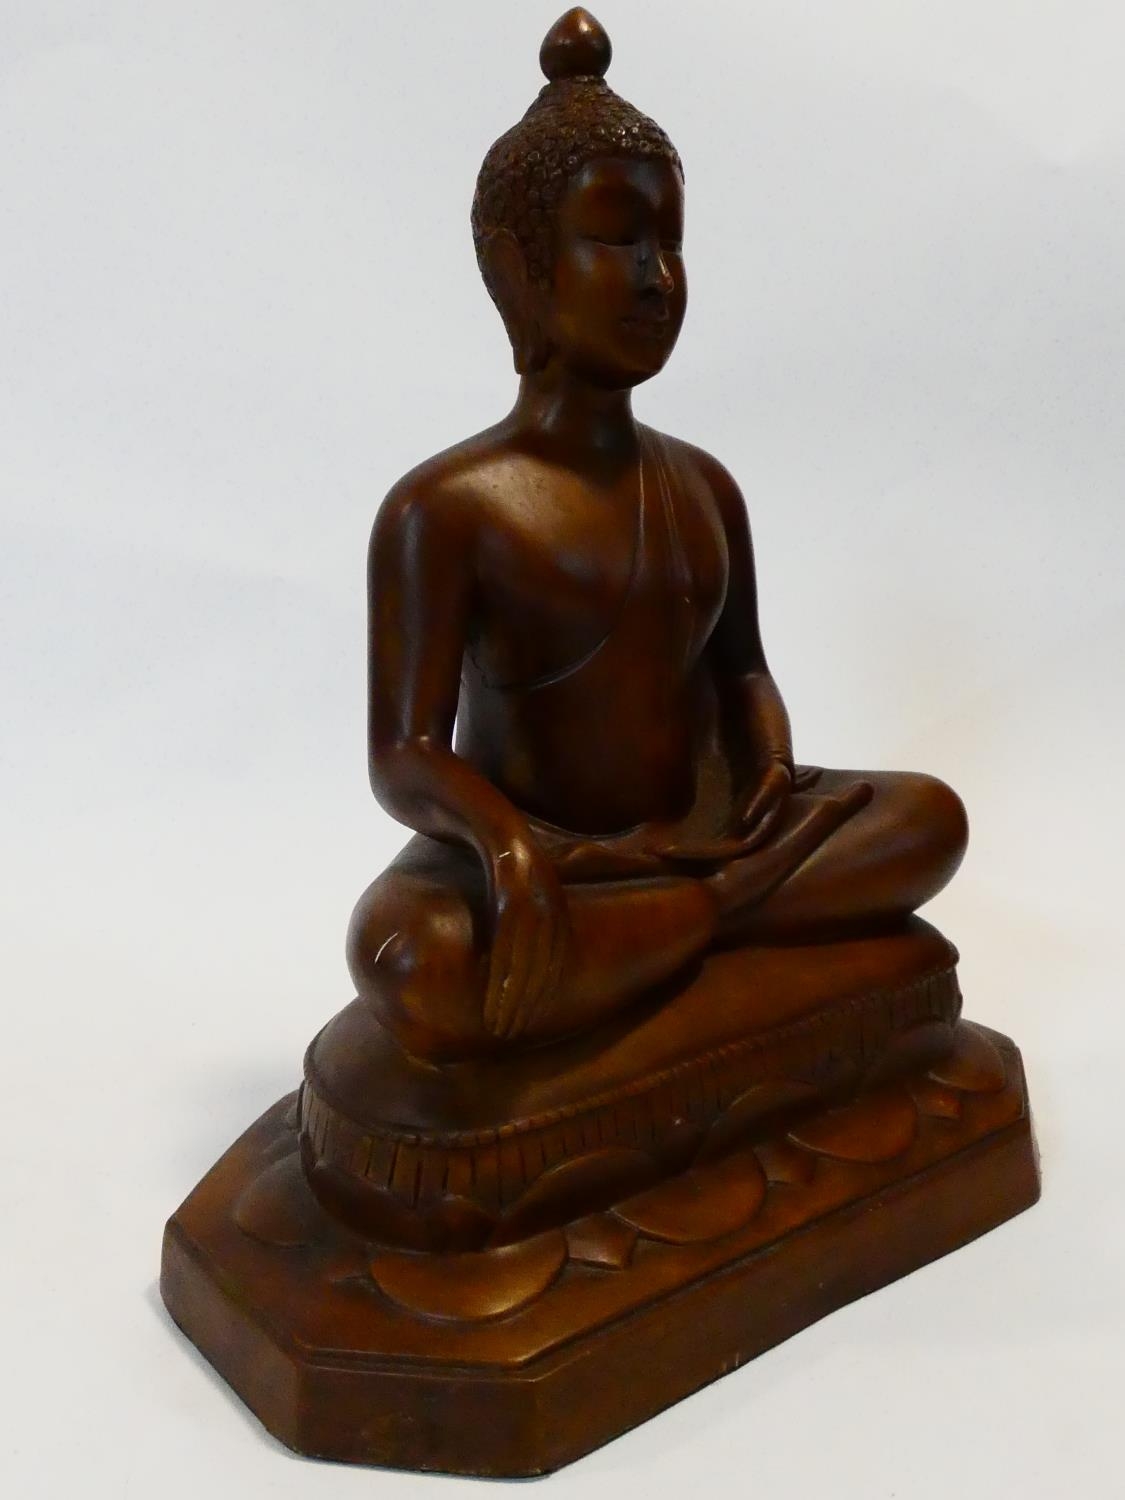 A gilded resin seated Buddha figure. H.41 W.32 L.20cm - Image 4 of 7